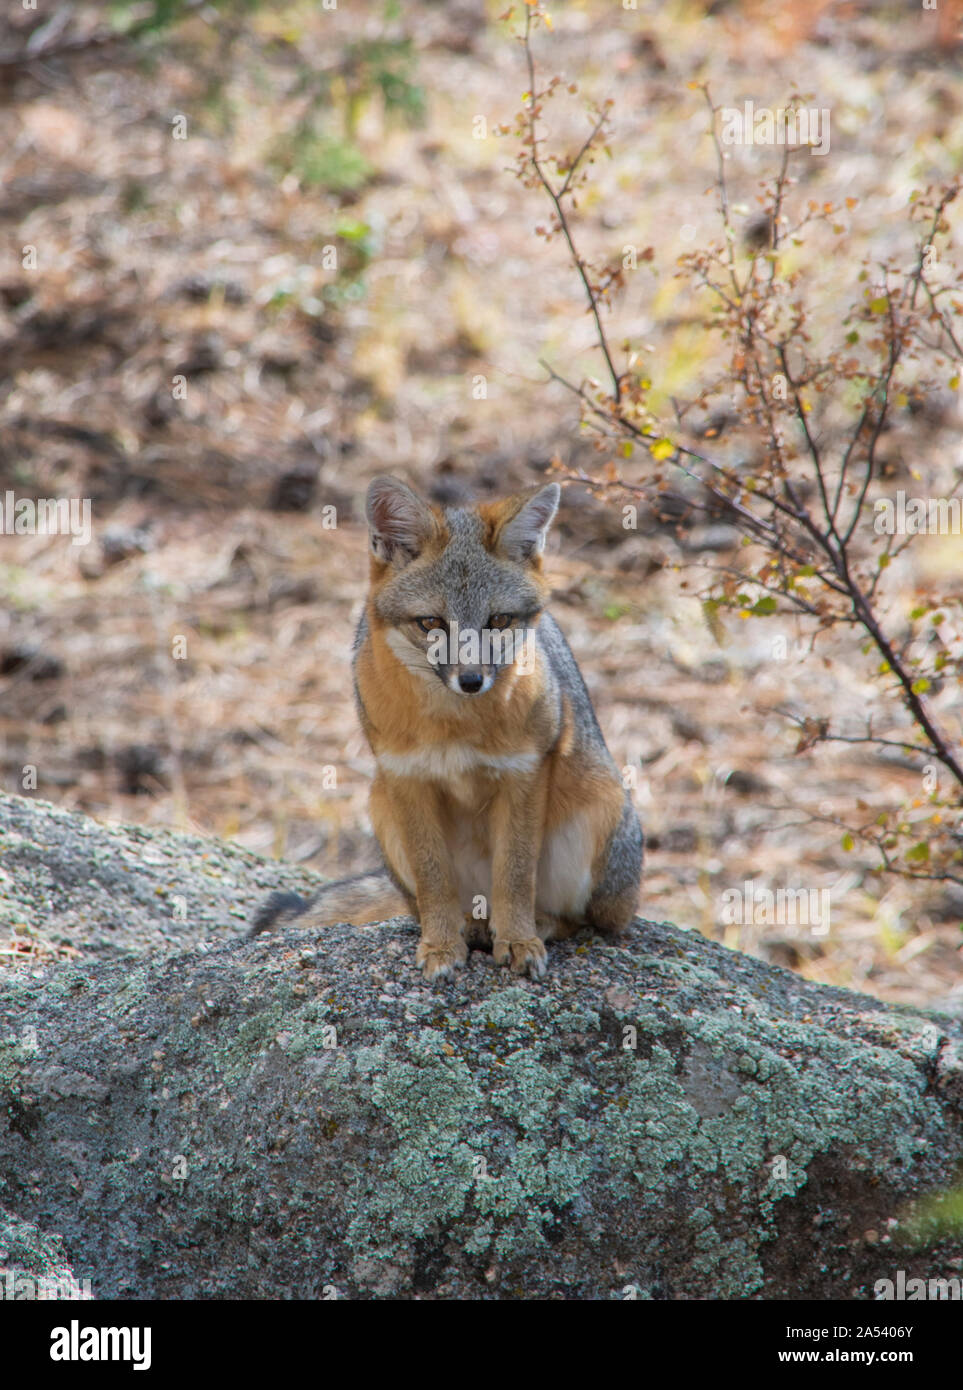 Young Gray Fox or Grey Fox (Urocyon cinereoargenteus) sits on lichen covered boulder in the Pike National Forest Colorado USA. Photo taken in October. Stock Photo